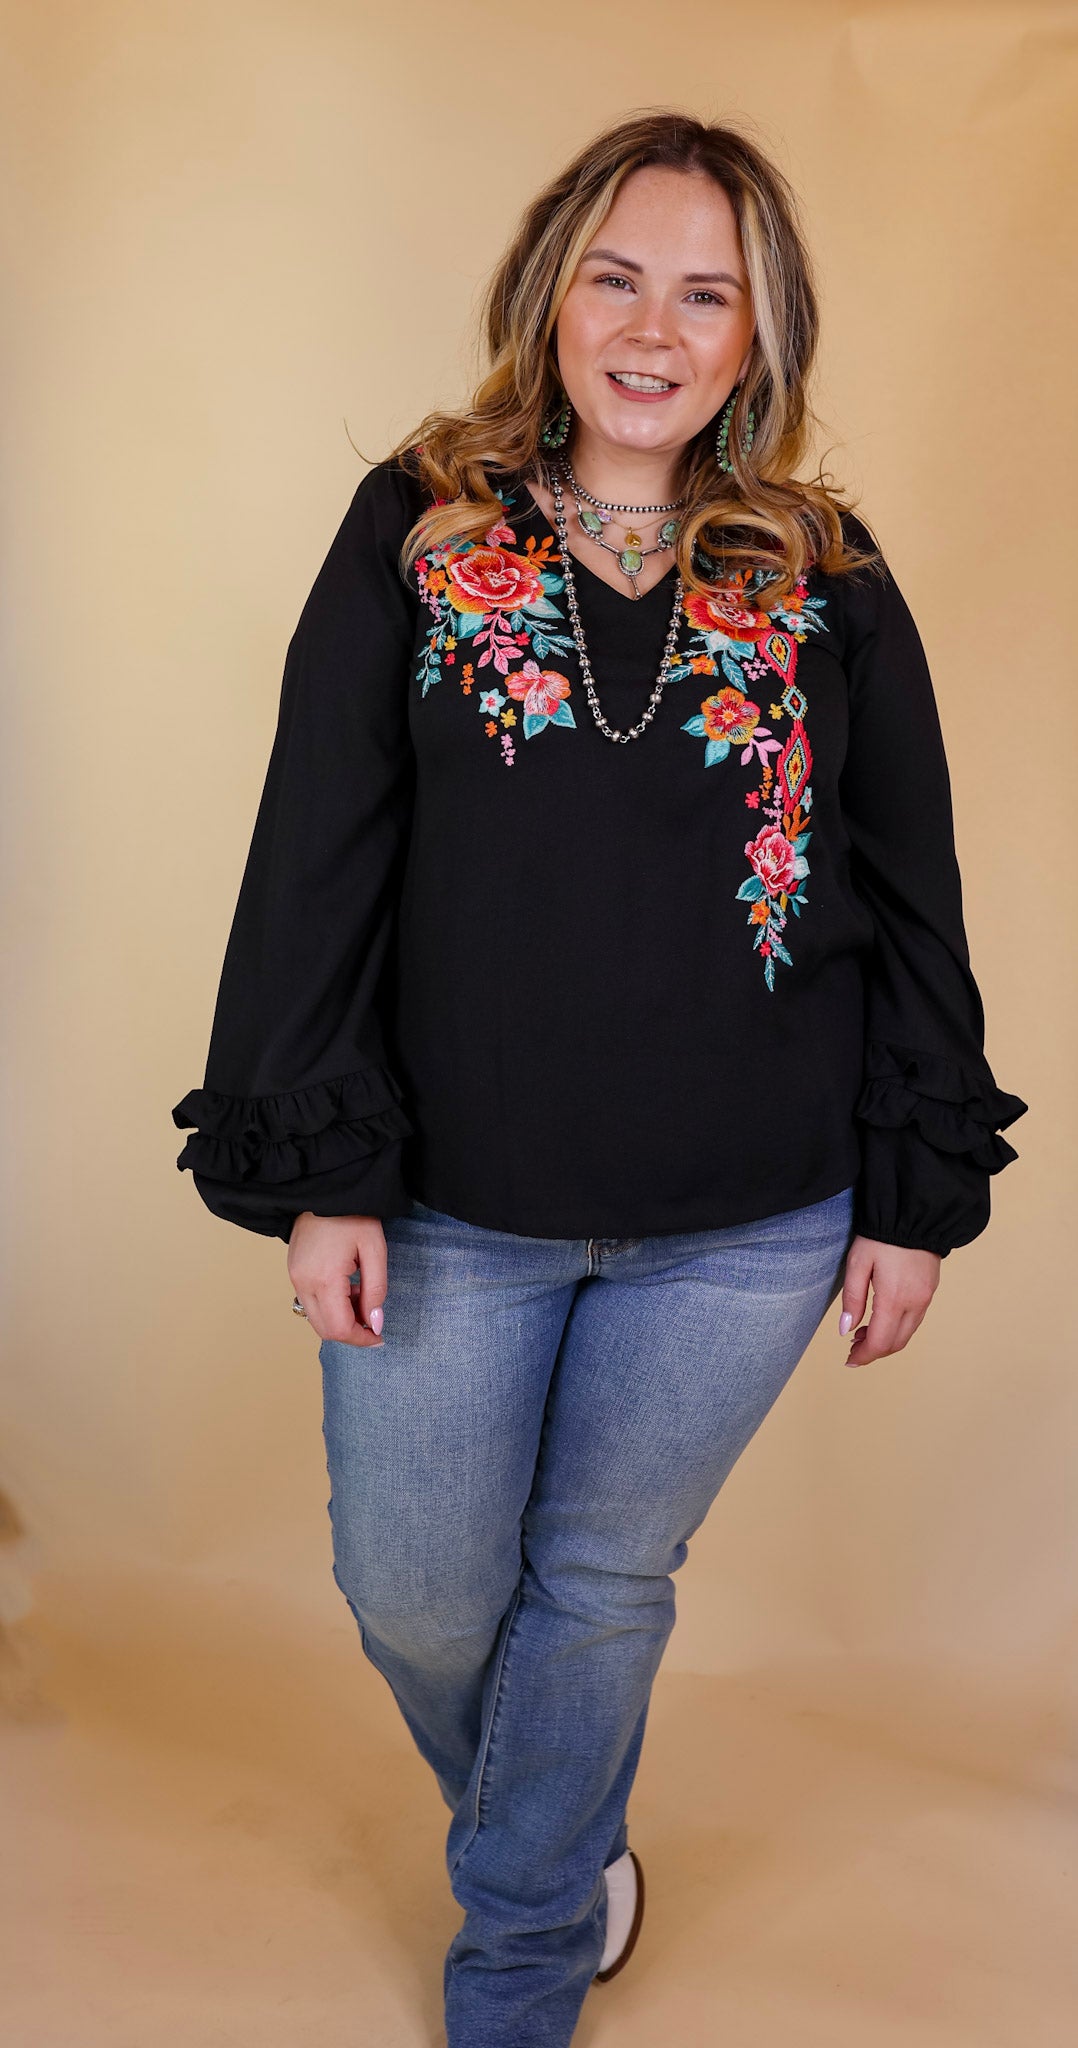 Vineyard Villa Floral Embroidered Top with Long Ruffle Sleeves in Black - Giddy Up Glamour Boutique